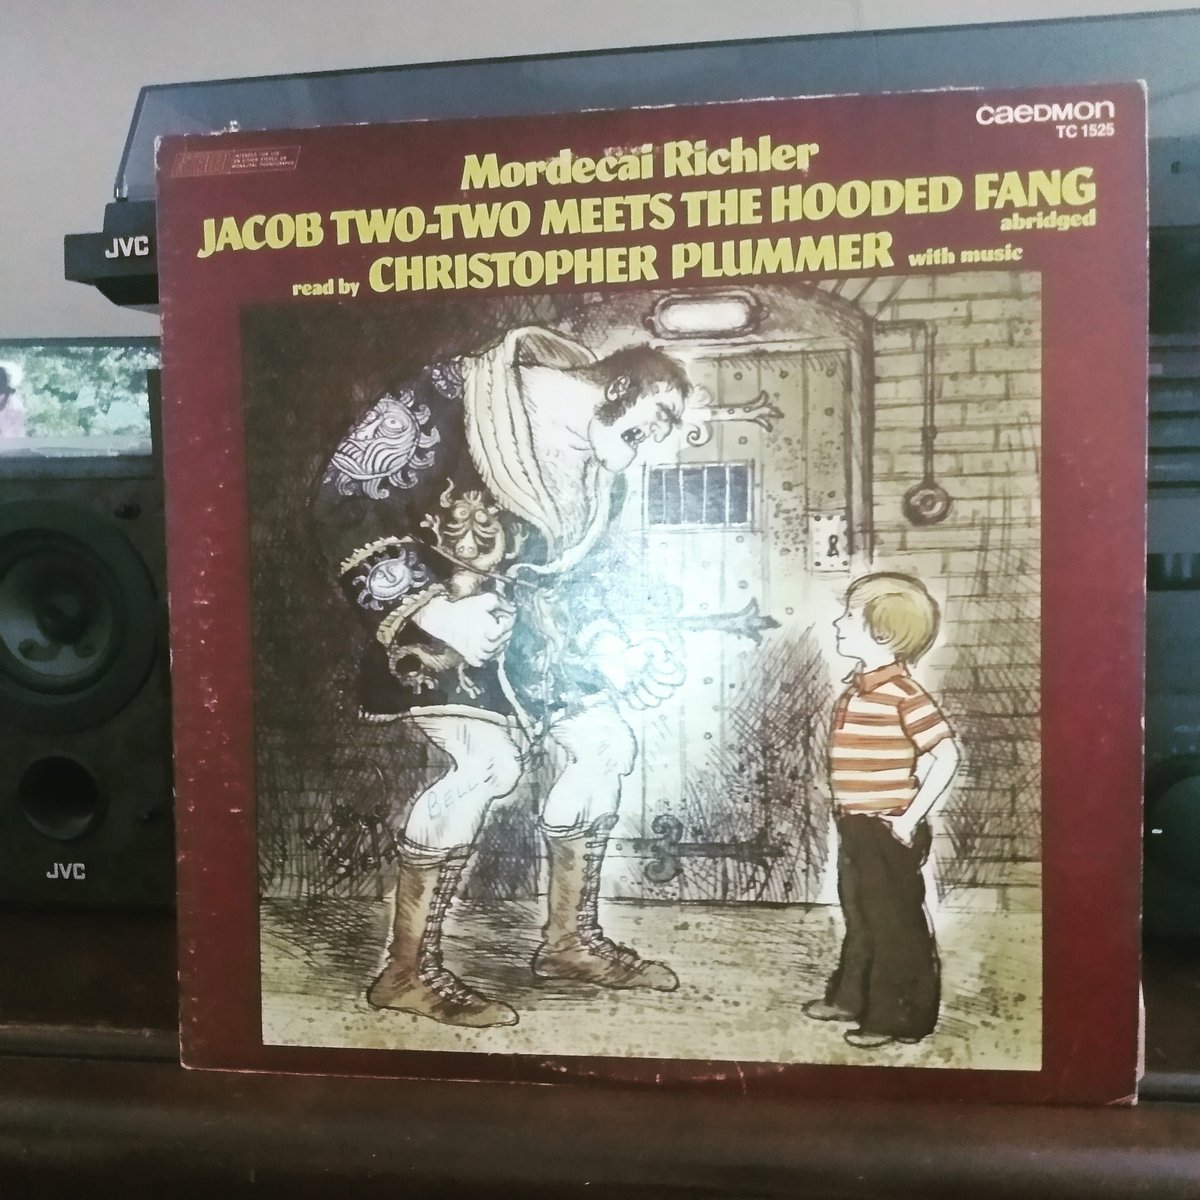 #NowSpinning 
Mordecai Richler - Jacob Two-Two Meets The Hooded Fang
Read by Christopher Plummer (RIP).
#Vinyl #MordecaiRichler